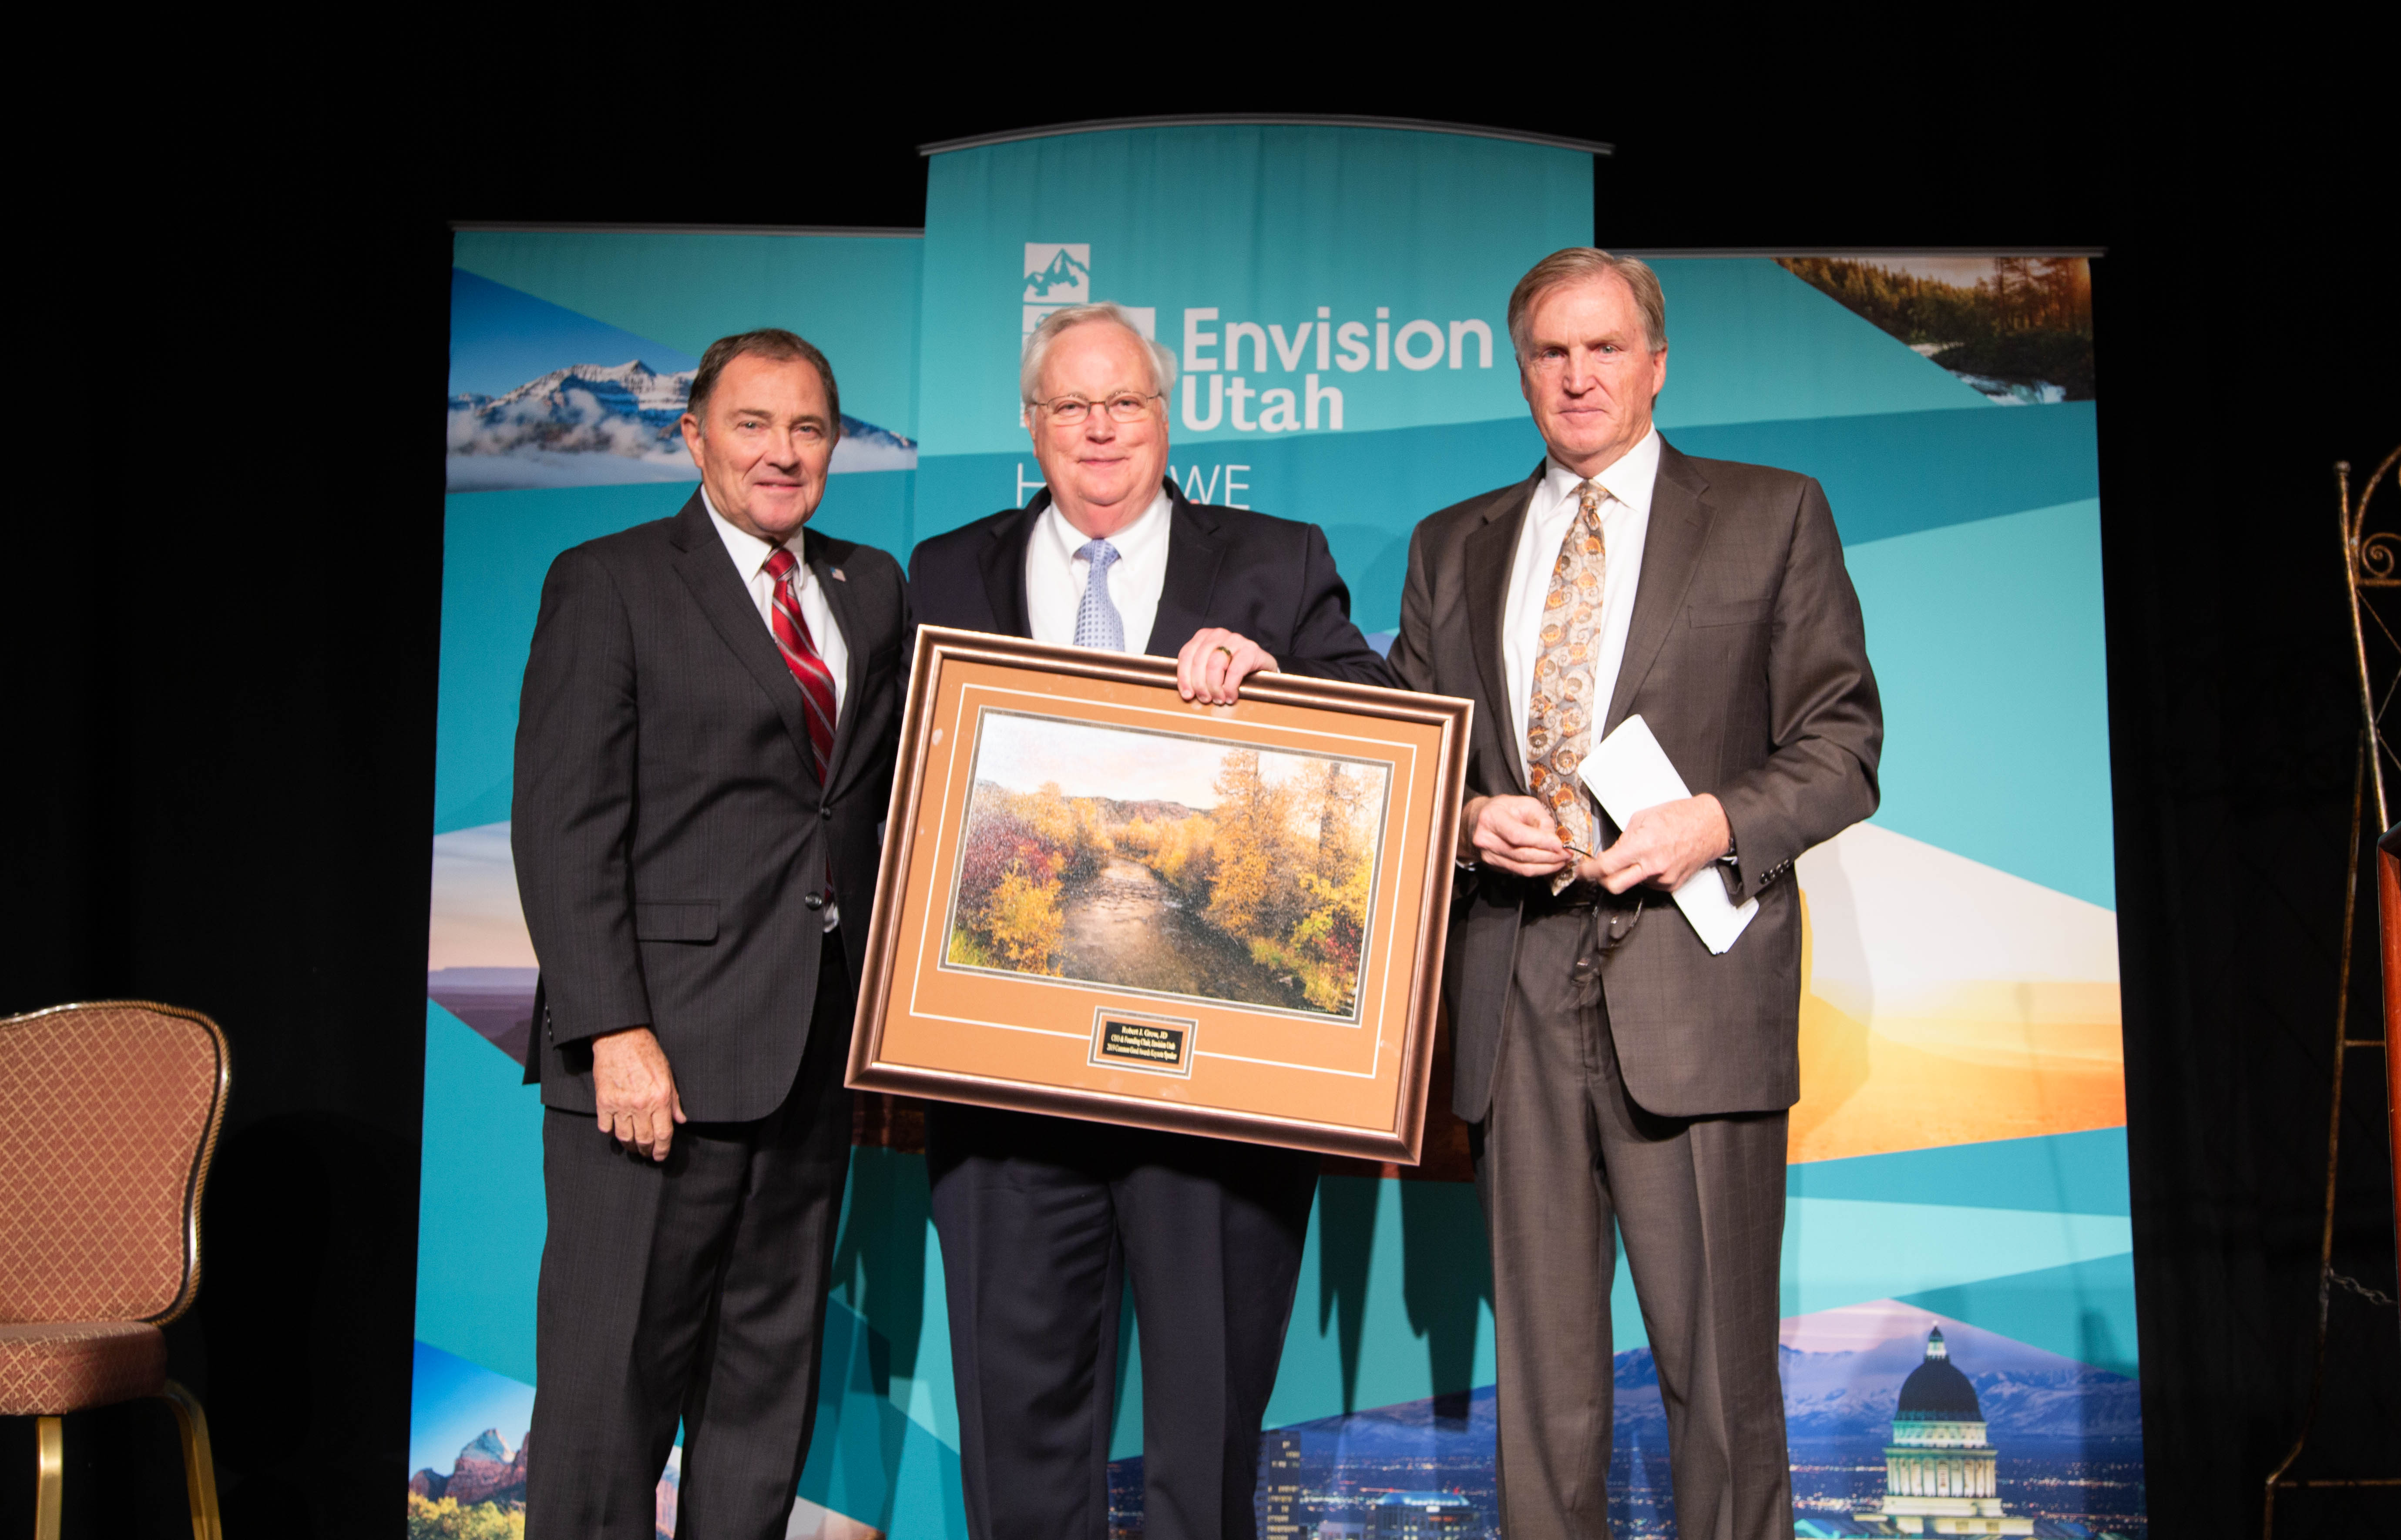 Utah Governor Gary Herbert, Envision Utah CEO Robert Grow and Jacobsen Board of Directors Chairman Lonnie Bullard (left to right) are pictured at the 2019 Common Good Awards luncheon at the Grand America Hotel in Salt Lake City. Bullard, who is also the chairman of Envision Utah's Executive Committee, emceed the luncheon.